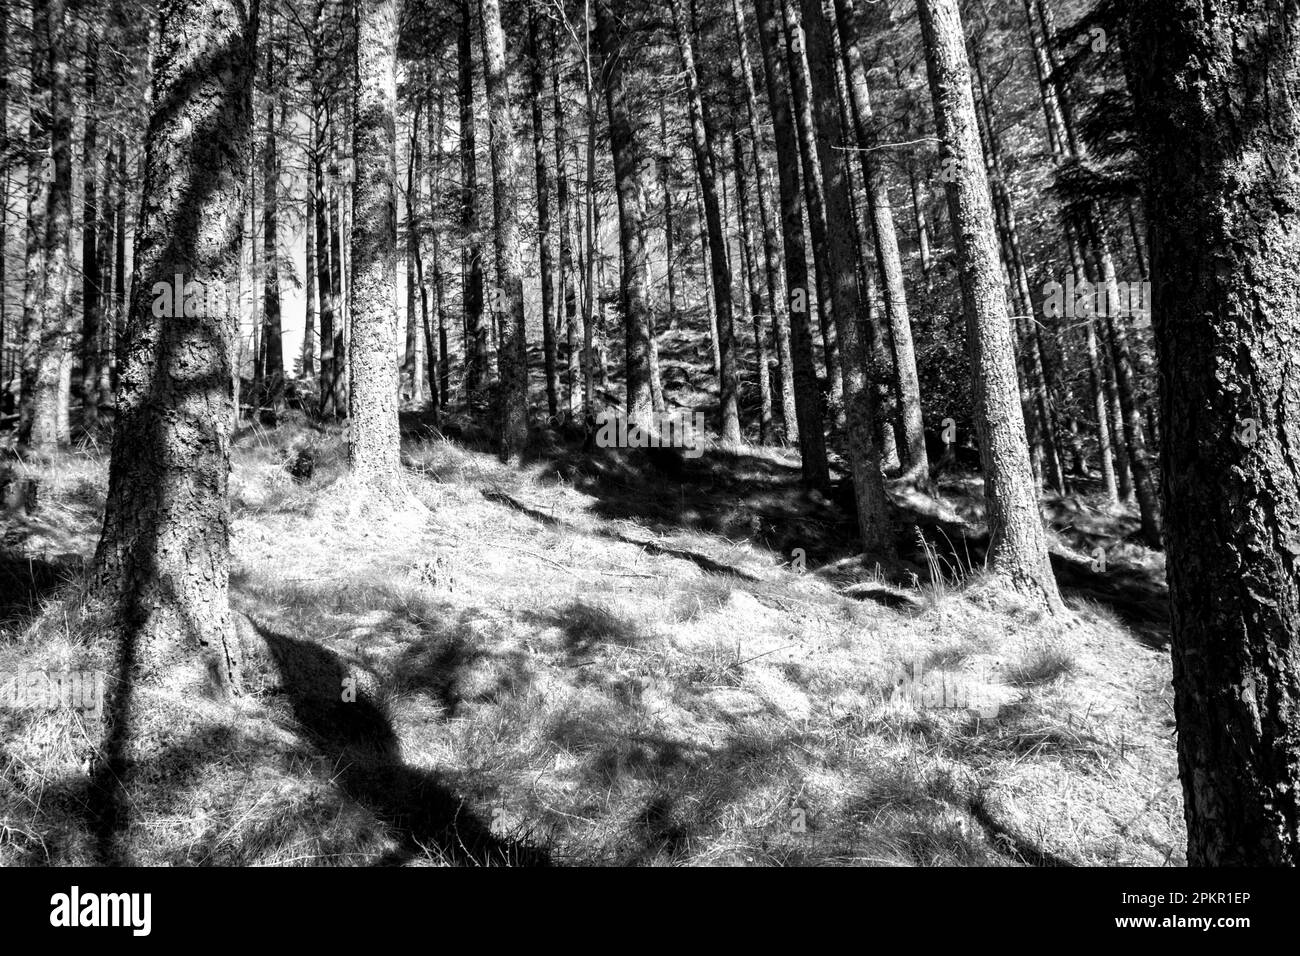 A small woodland of pines in black and white, sheltered in Glen Coe in the Scottish Highlands. Stock Photo